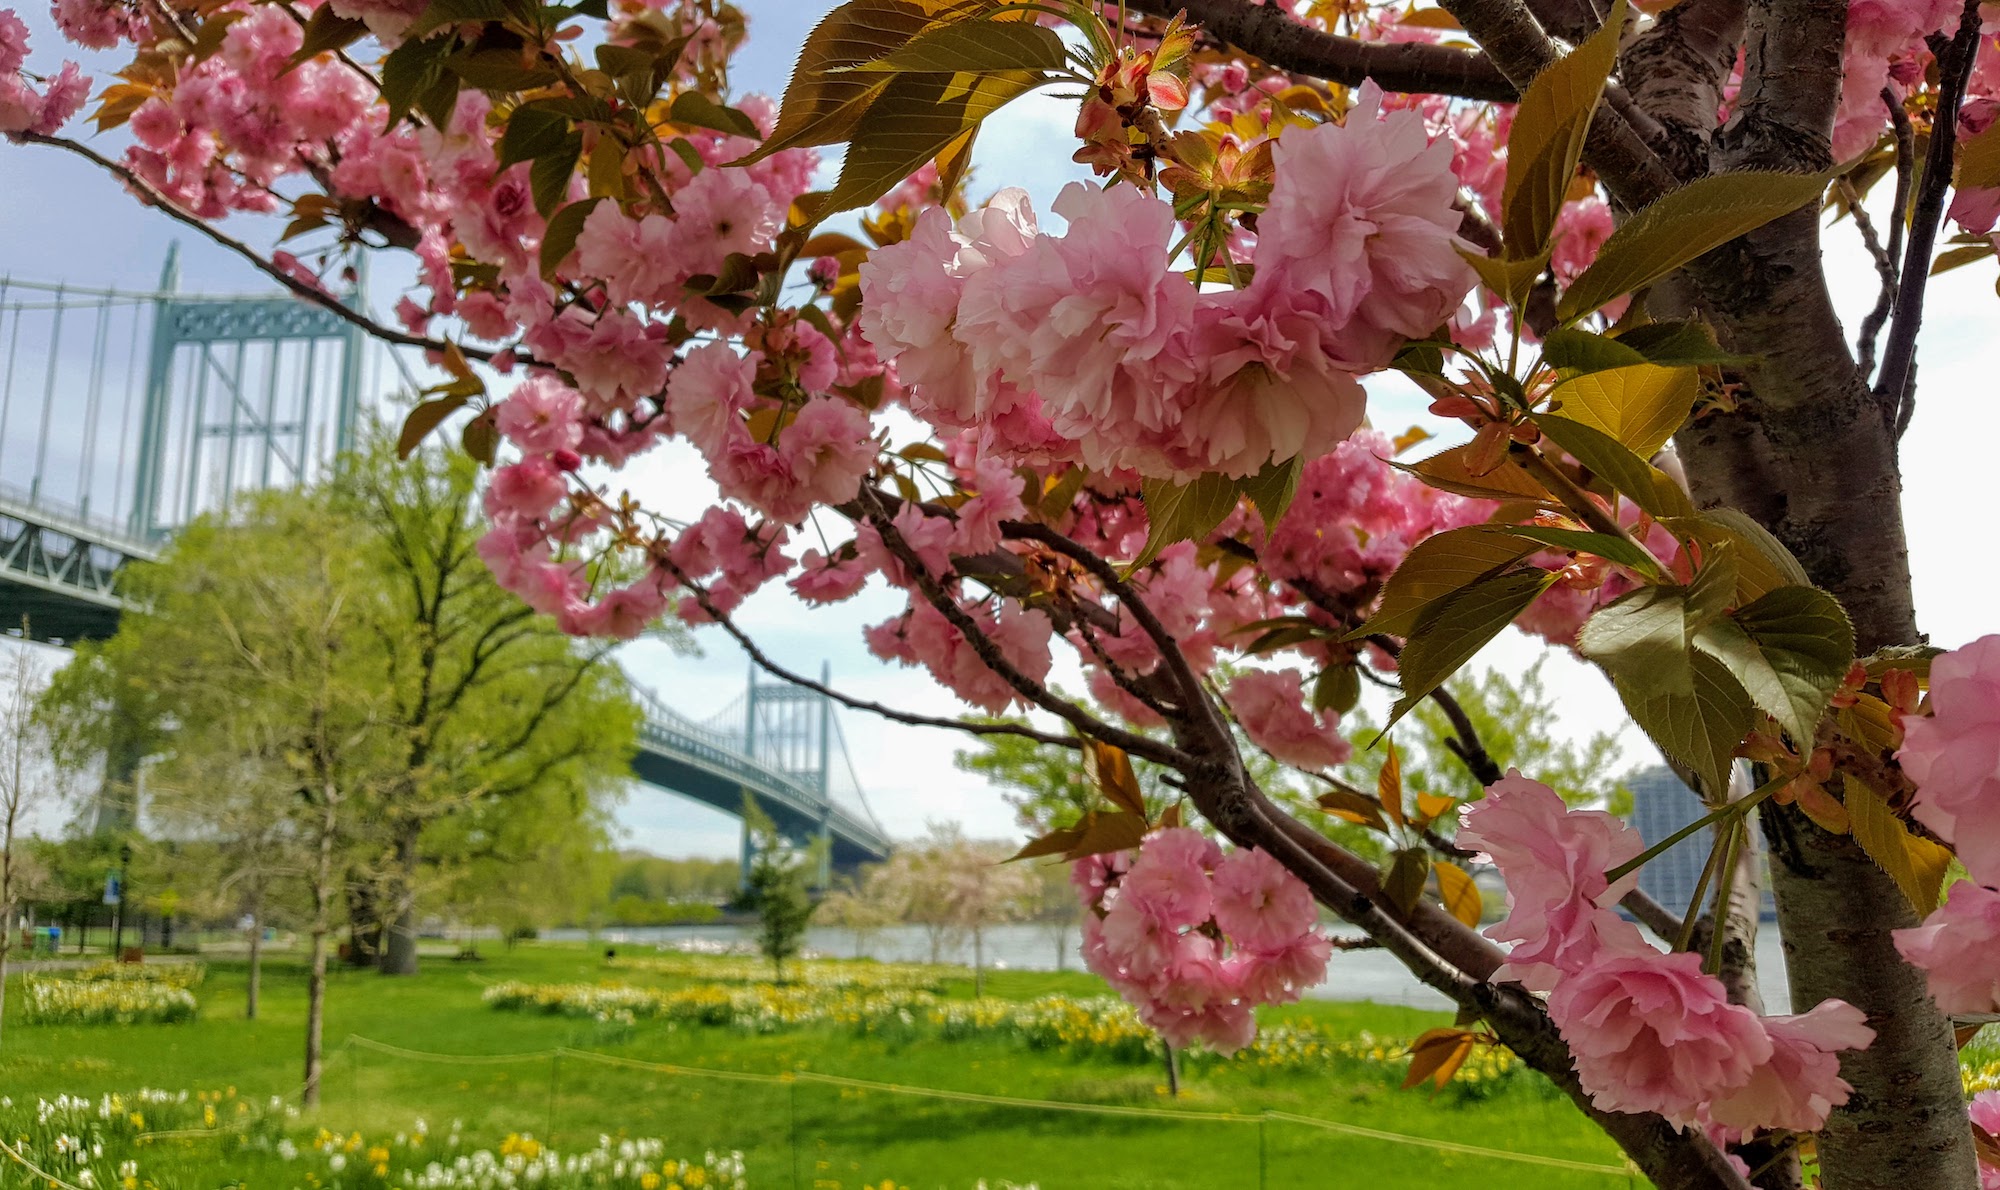 kwanzan cherry trees bloom near a patch of daffodils and a bridge in the park